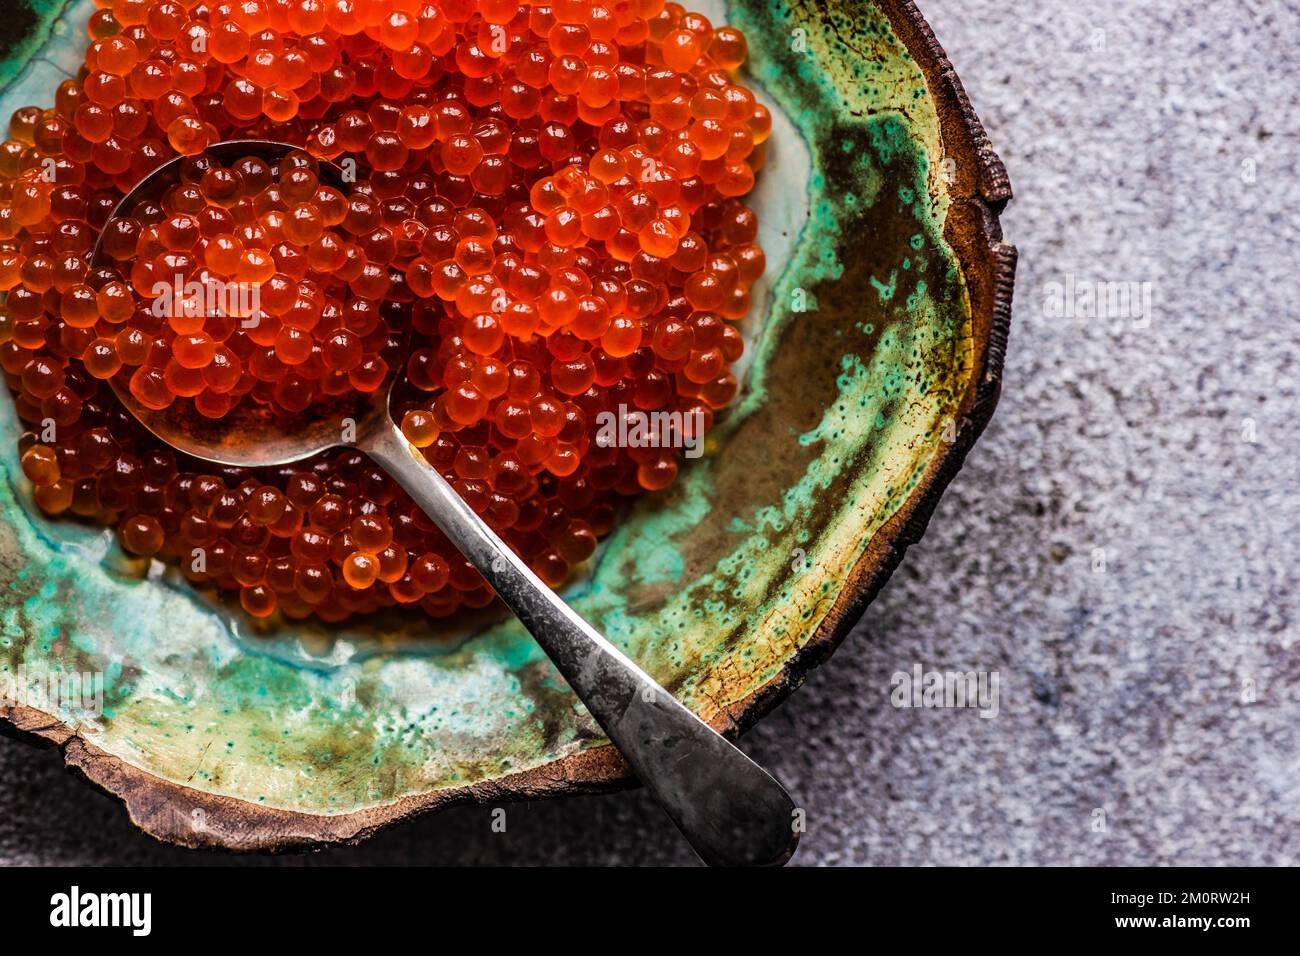 Close-up overhead view of a bowl of red trout caviar Stock Photo